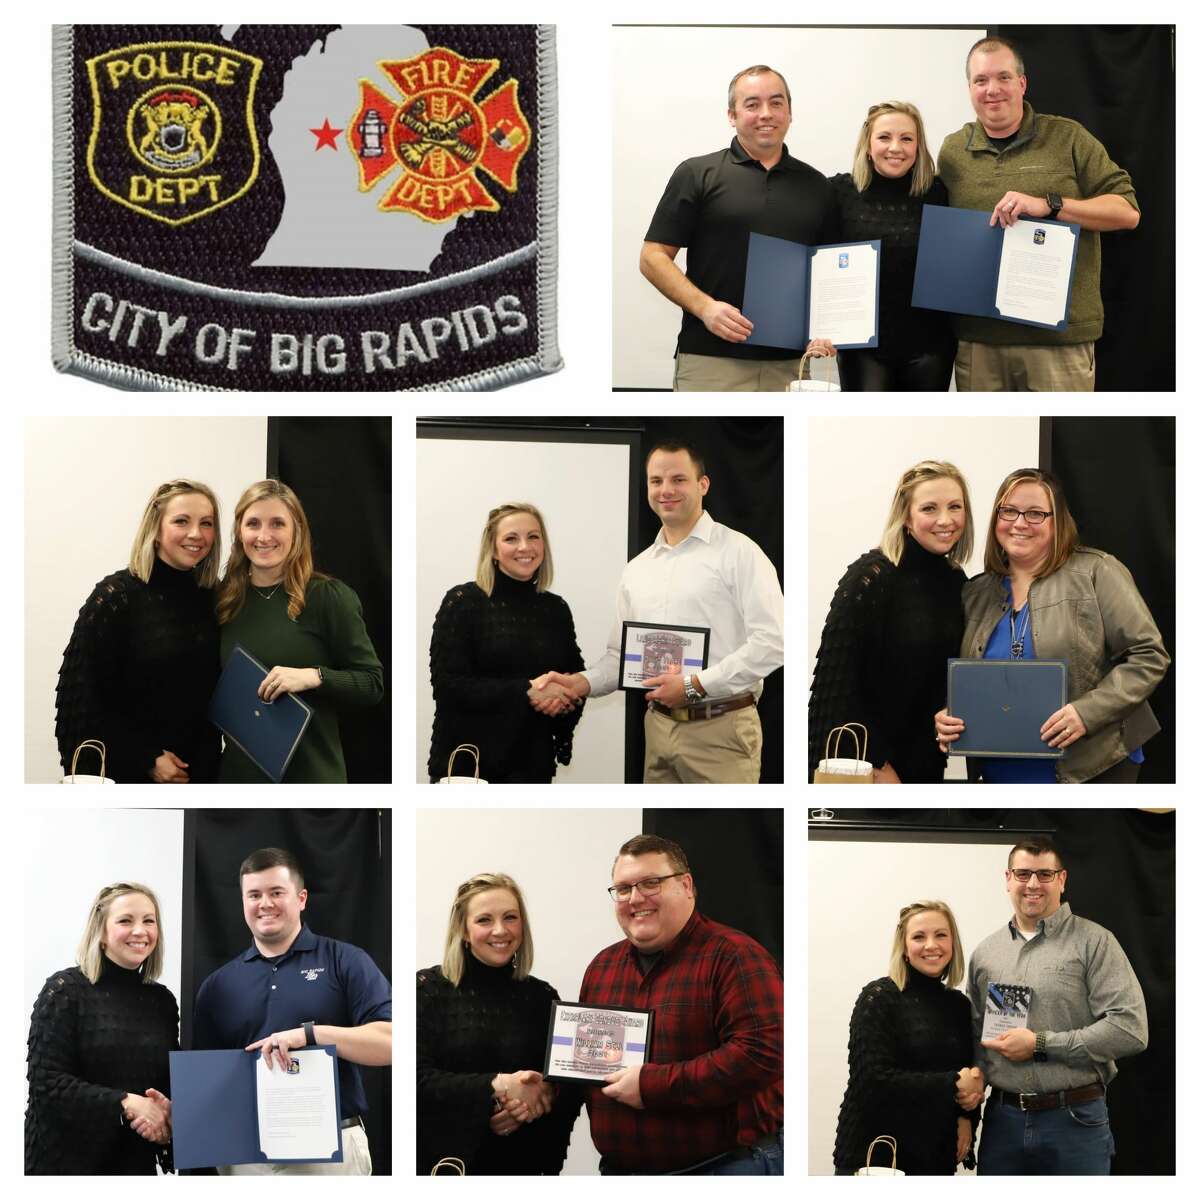 The Big Rapids Department of Public Safety hosted its annual awards banquet over the weekend with several officers being recognized for their achievements throughout 2021.